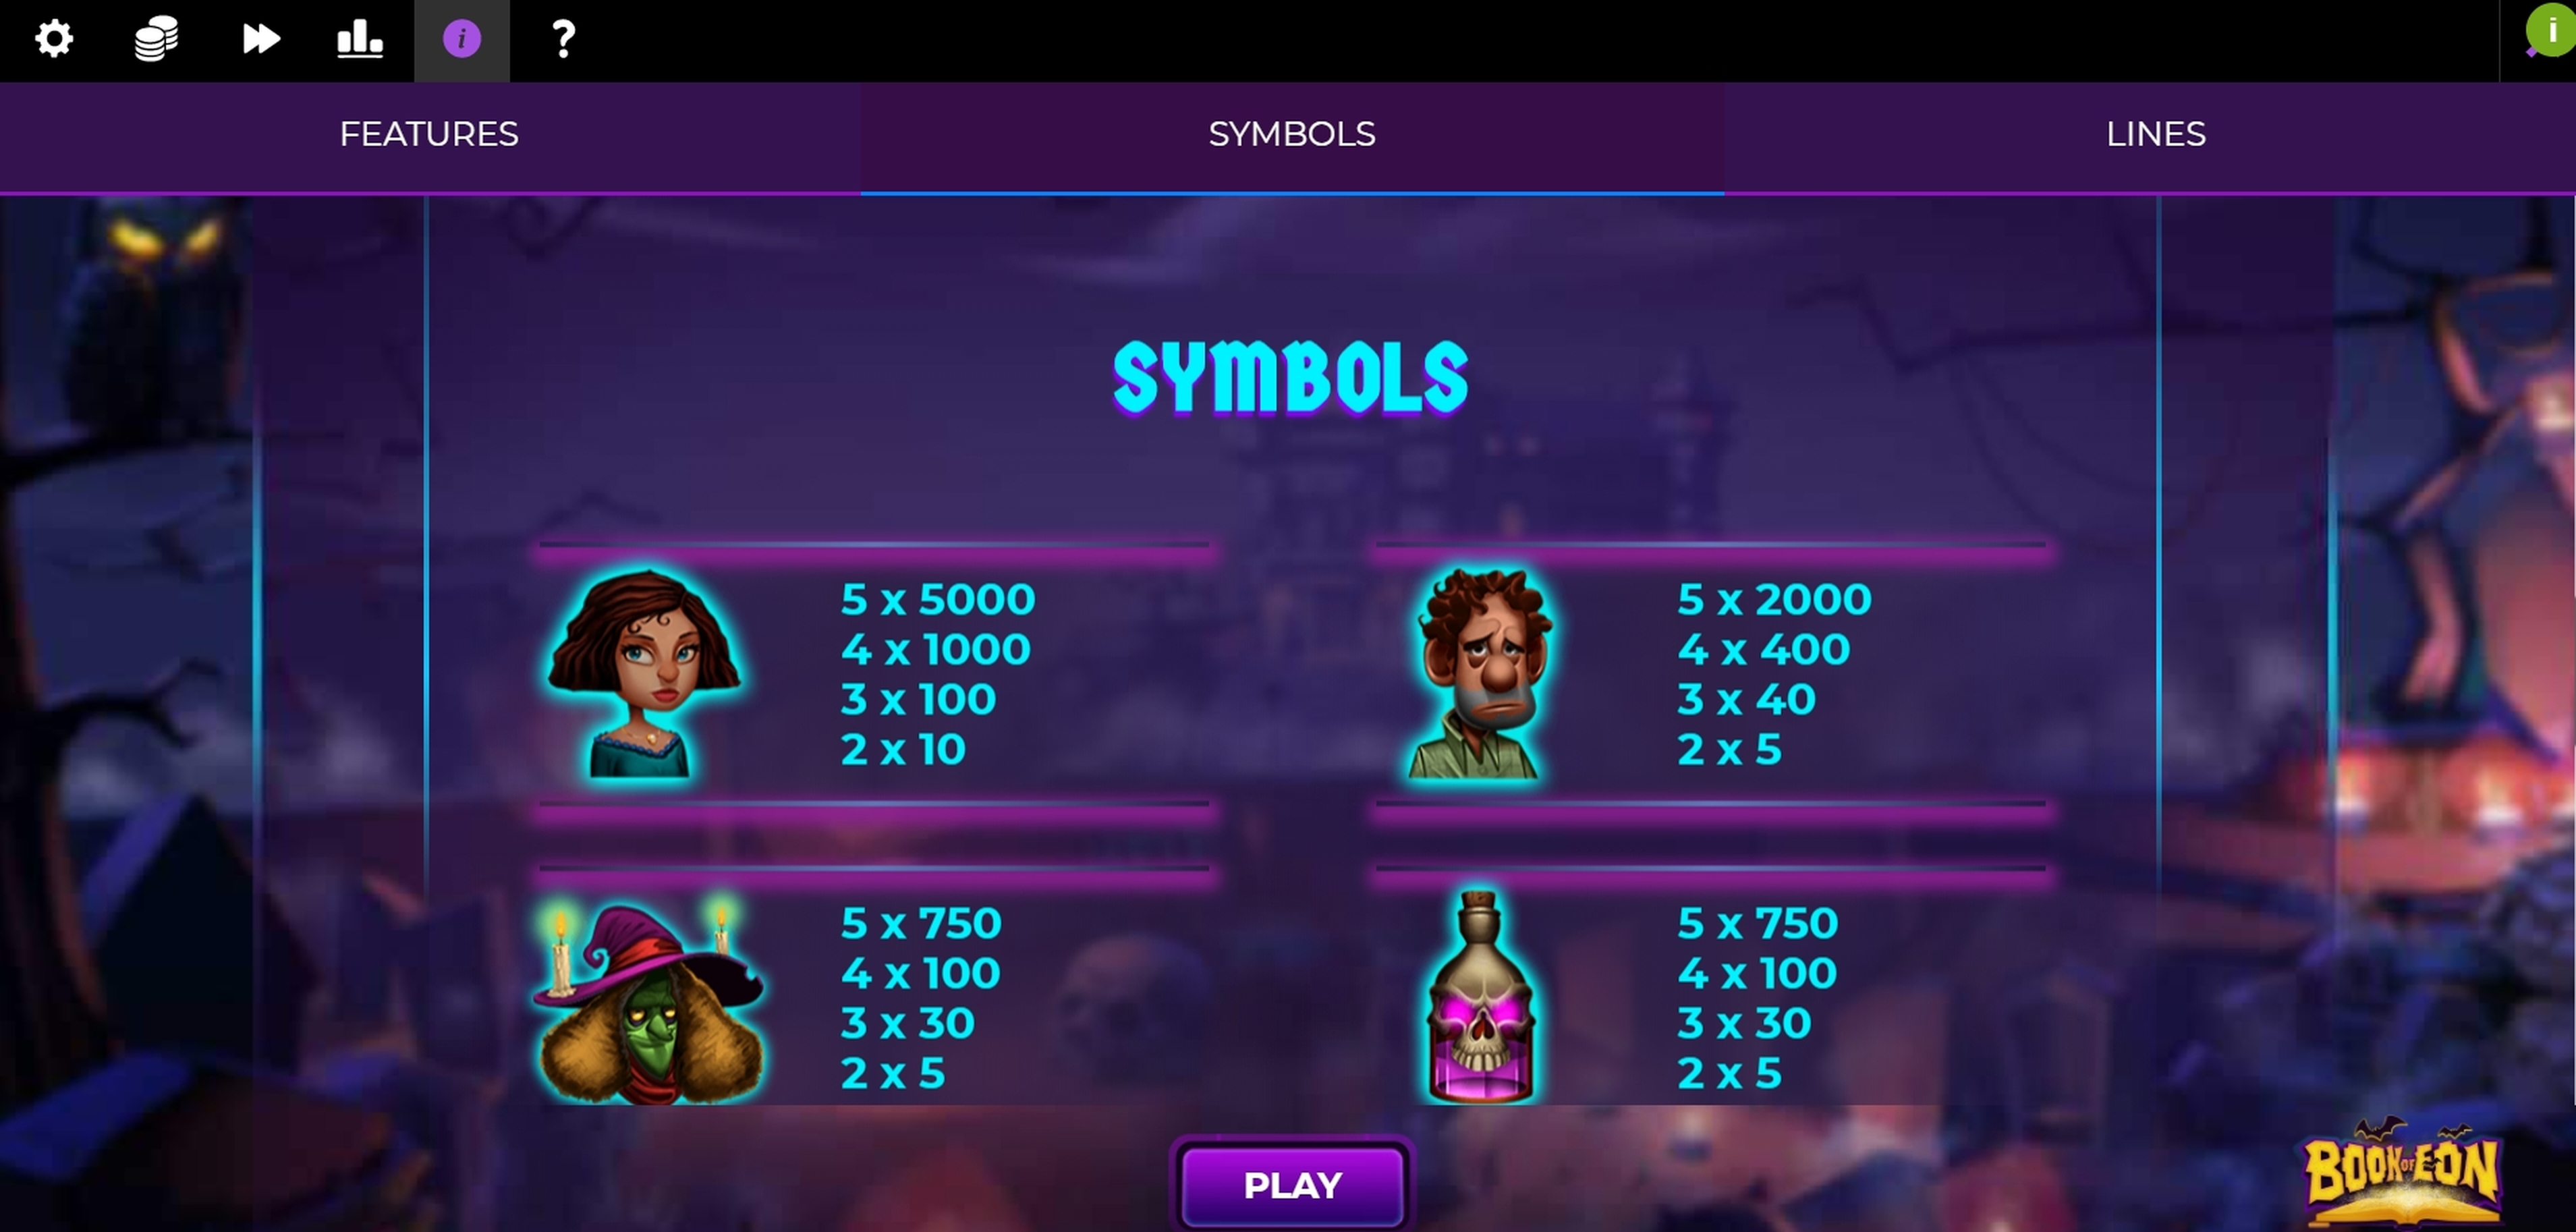 Info of Book of Eon Slot Game by Spinmatic